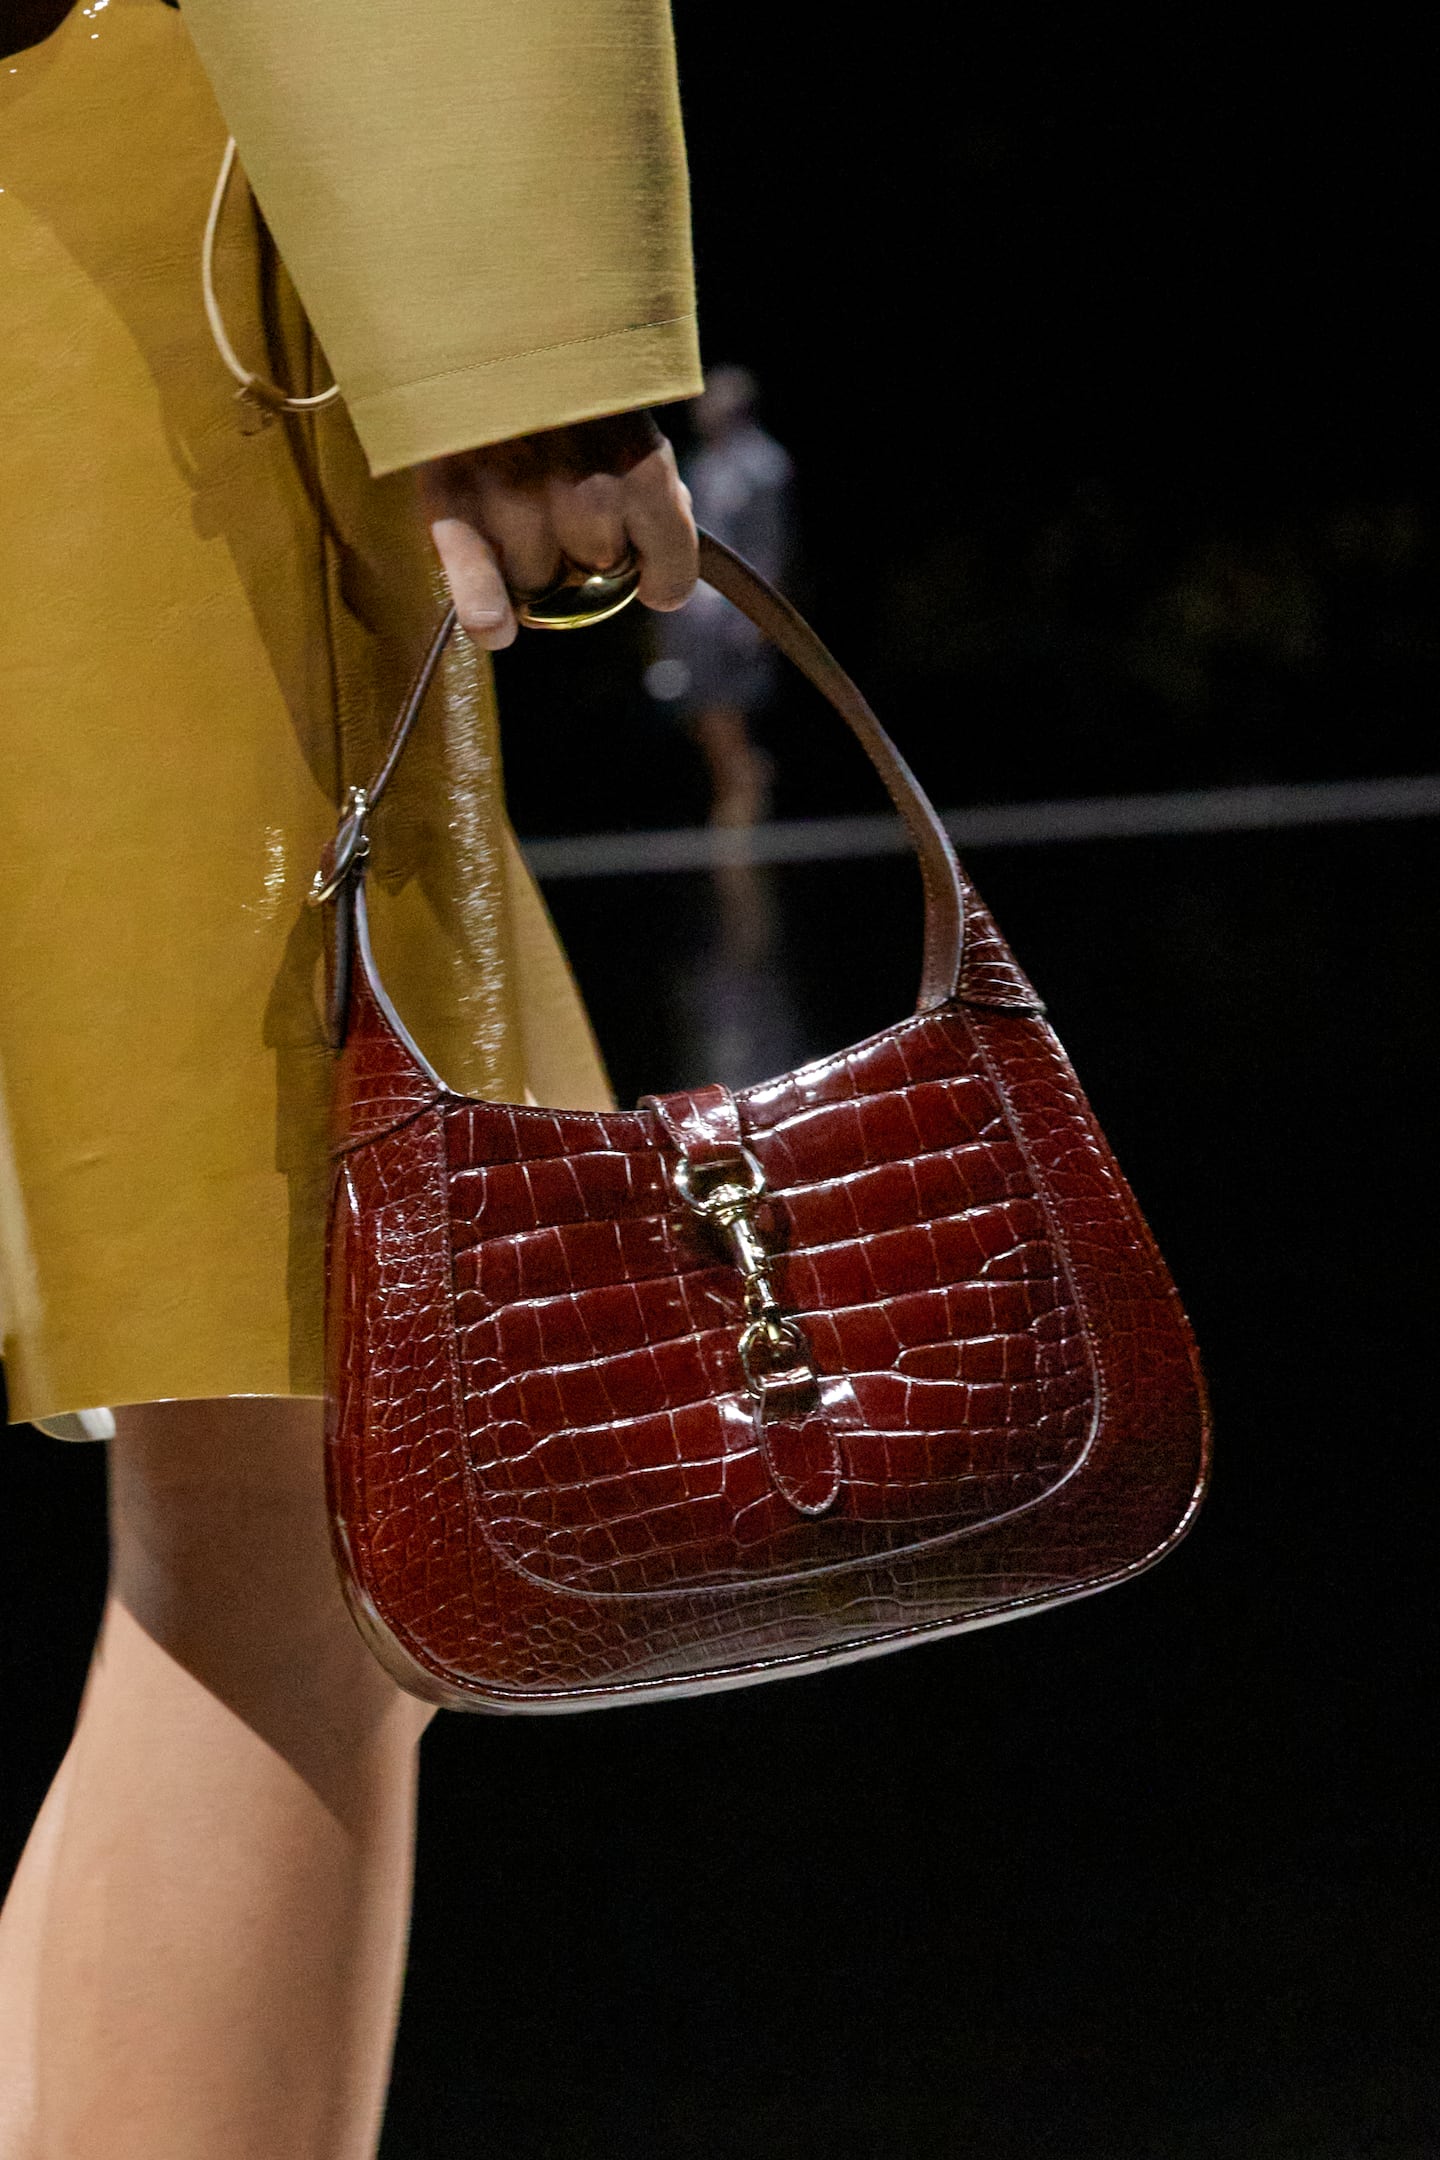 Gucci Handbags Disappoint At Auction as Luxury Fervour Cools | BoF